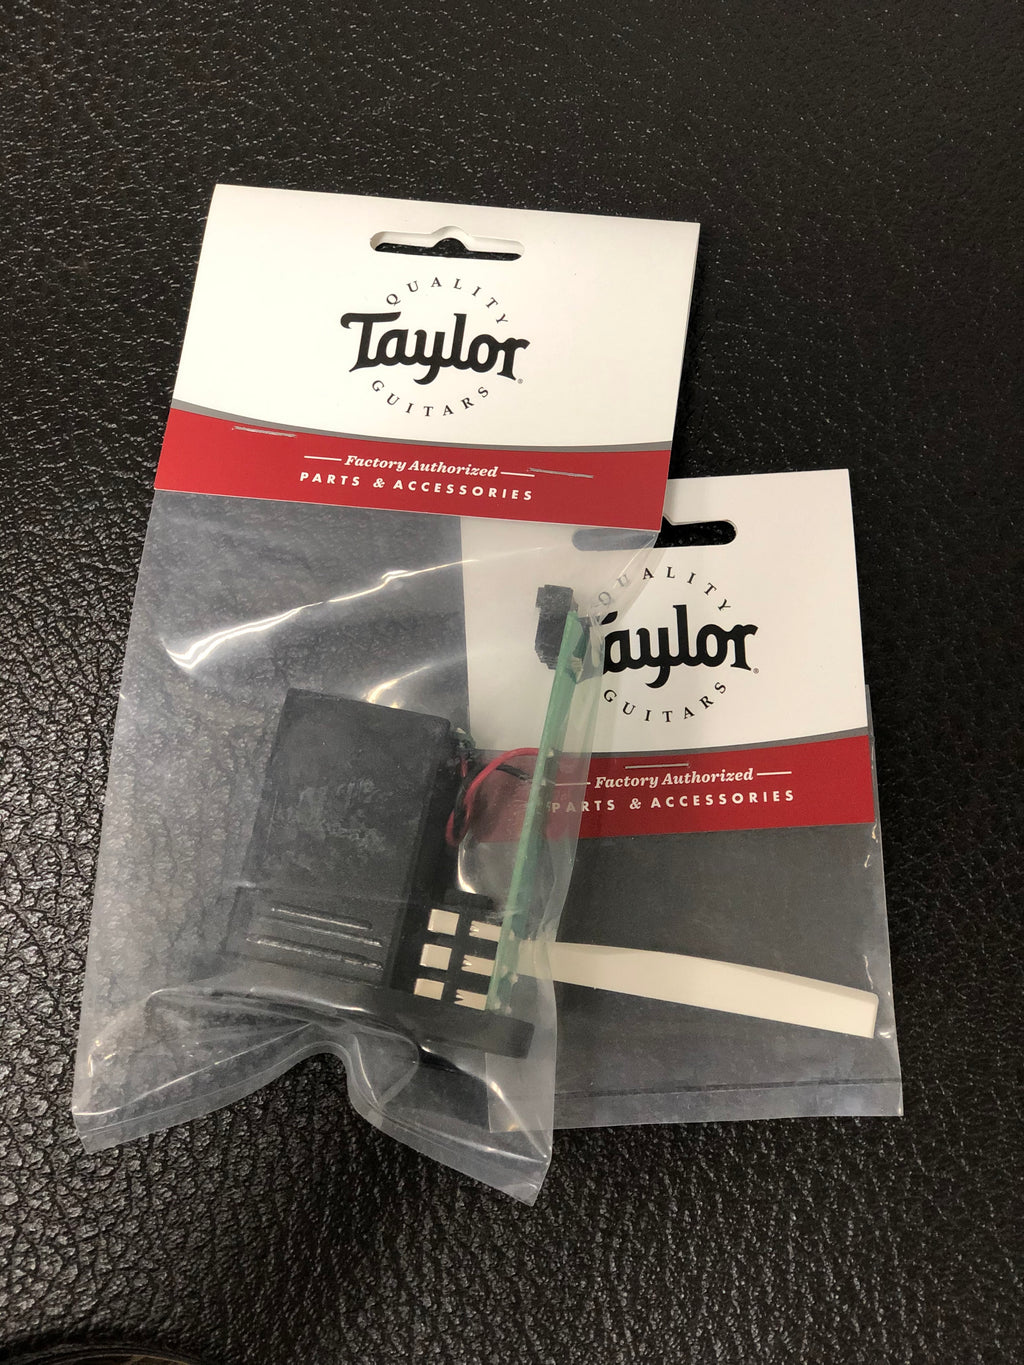 Taylor Guitars Parts and Accessories